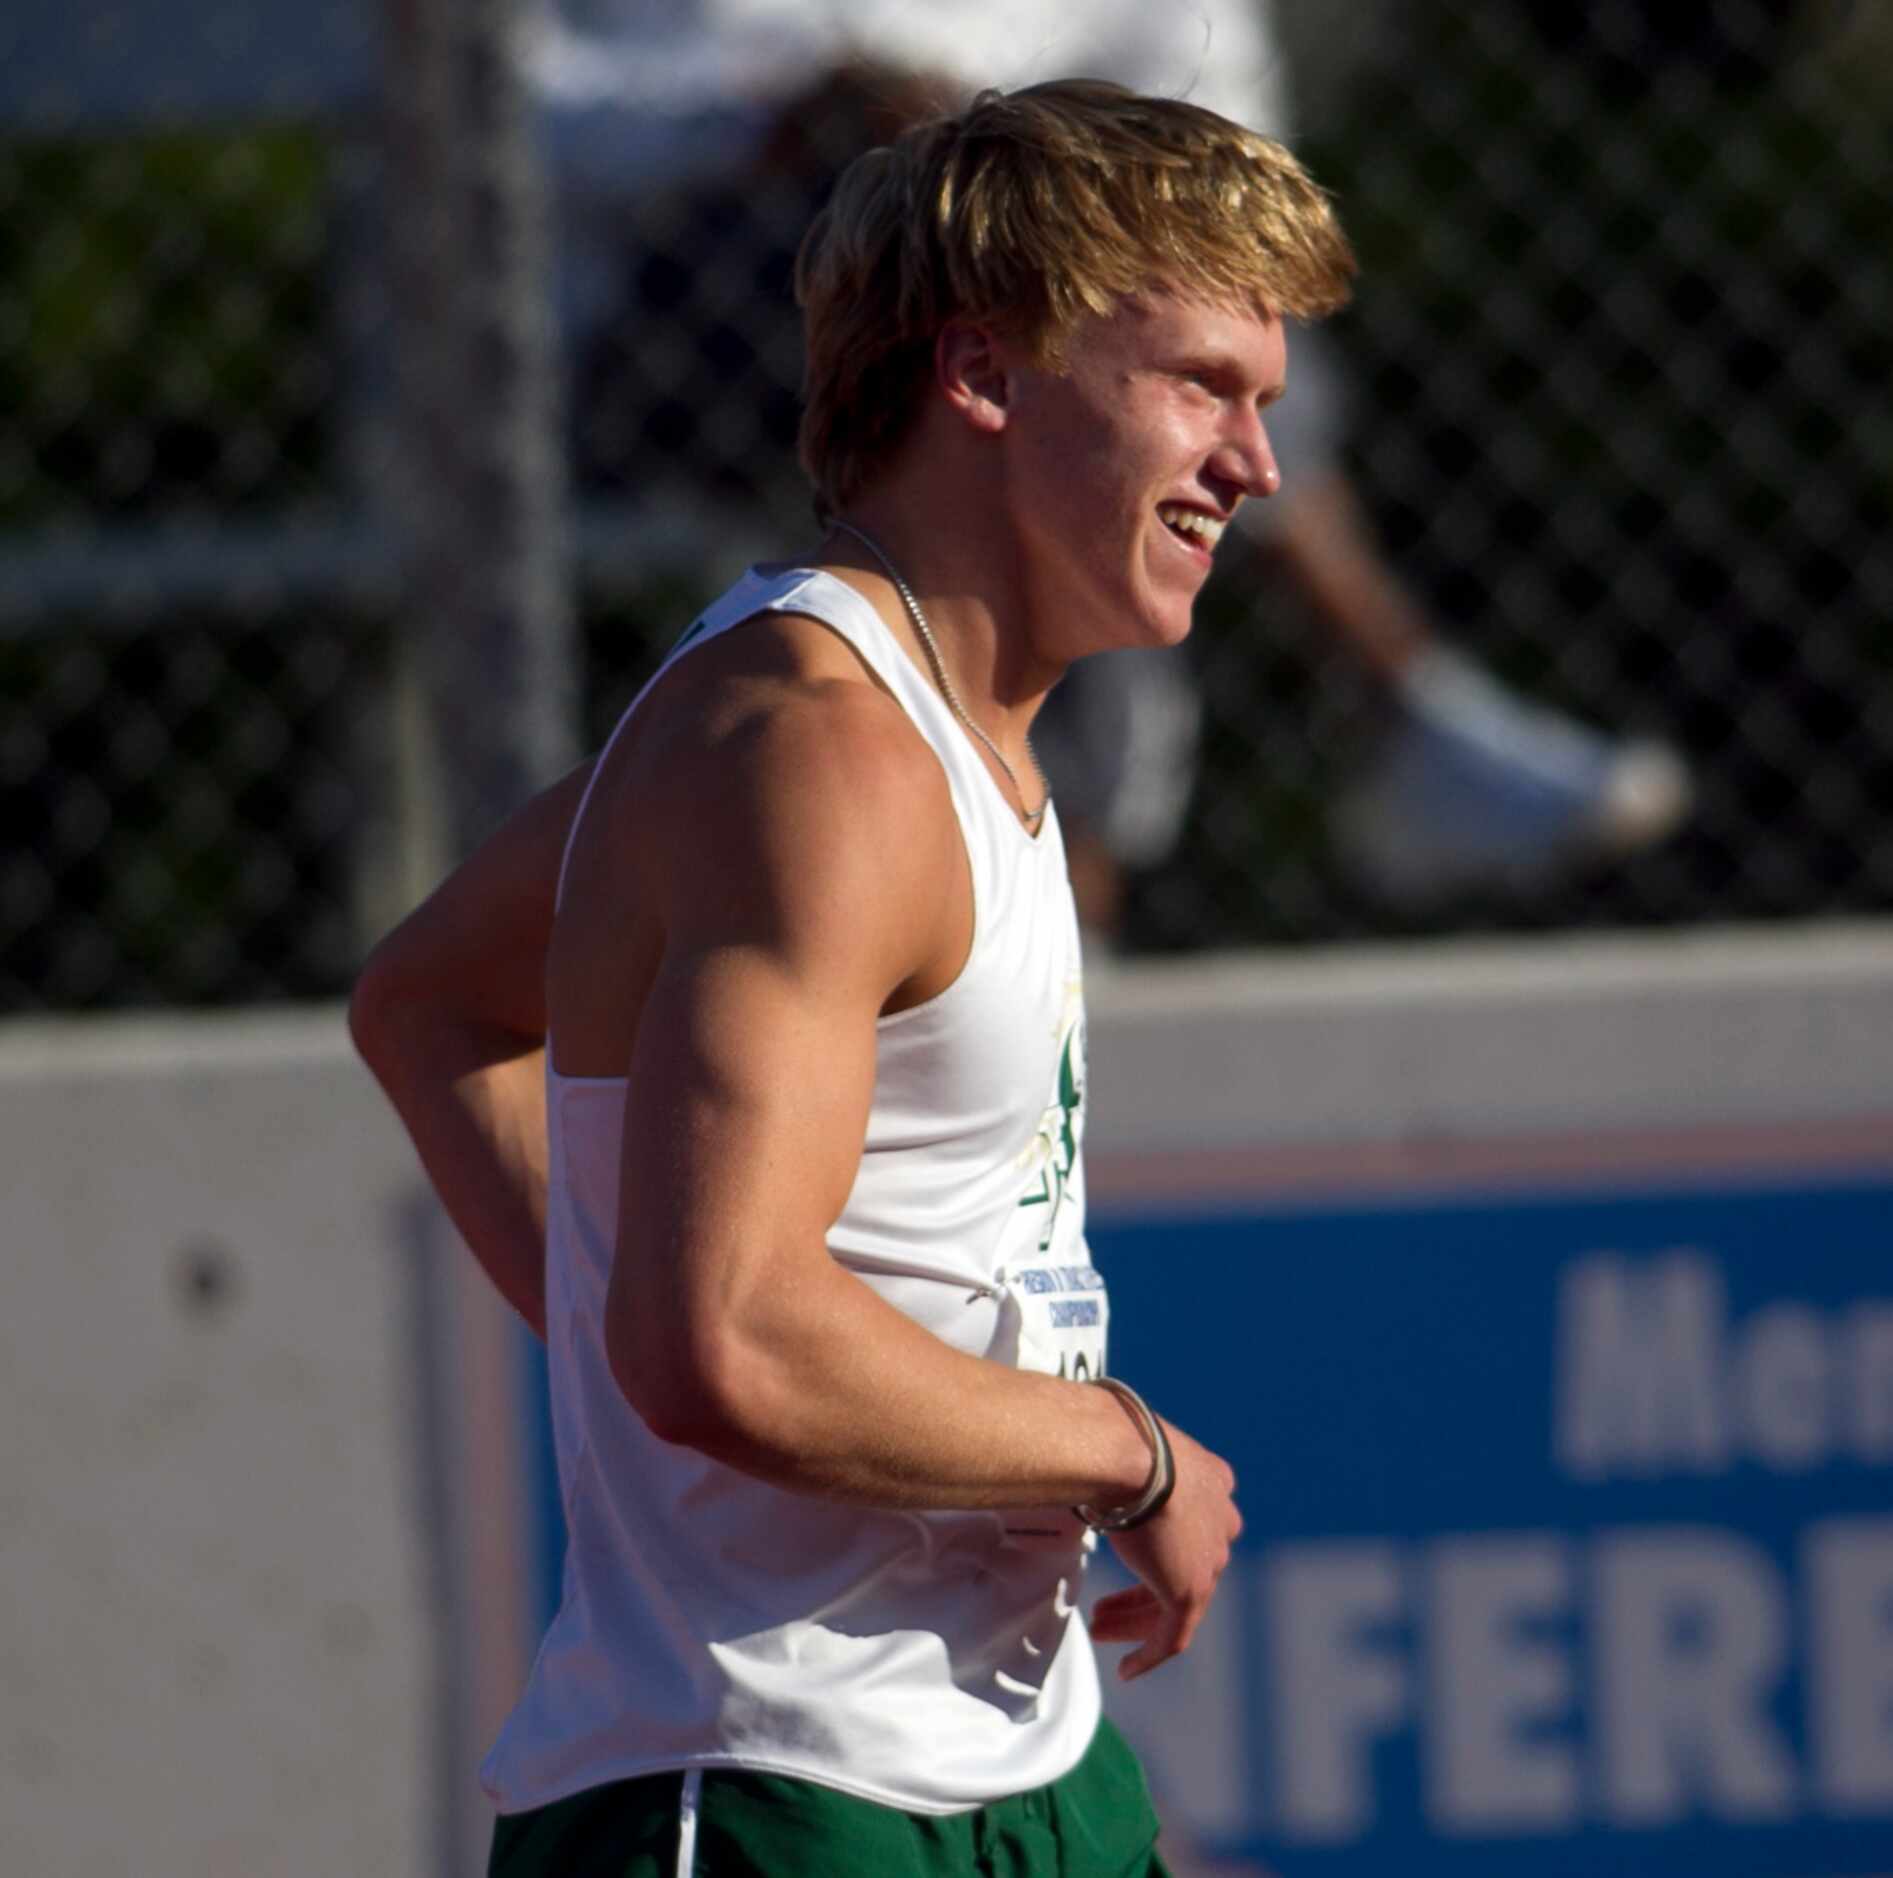 Frisco Lebanon Trail's Thomas Donley went wire to wire to win the Class 5A Boys 100 meter...